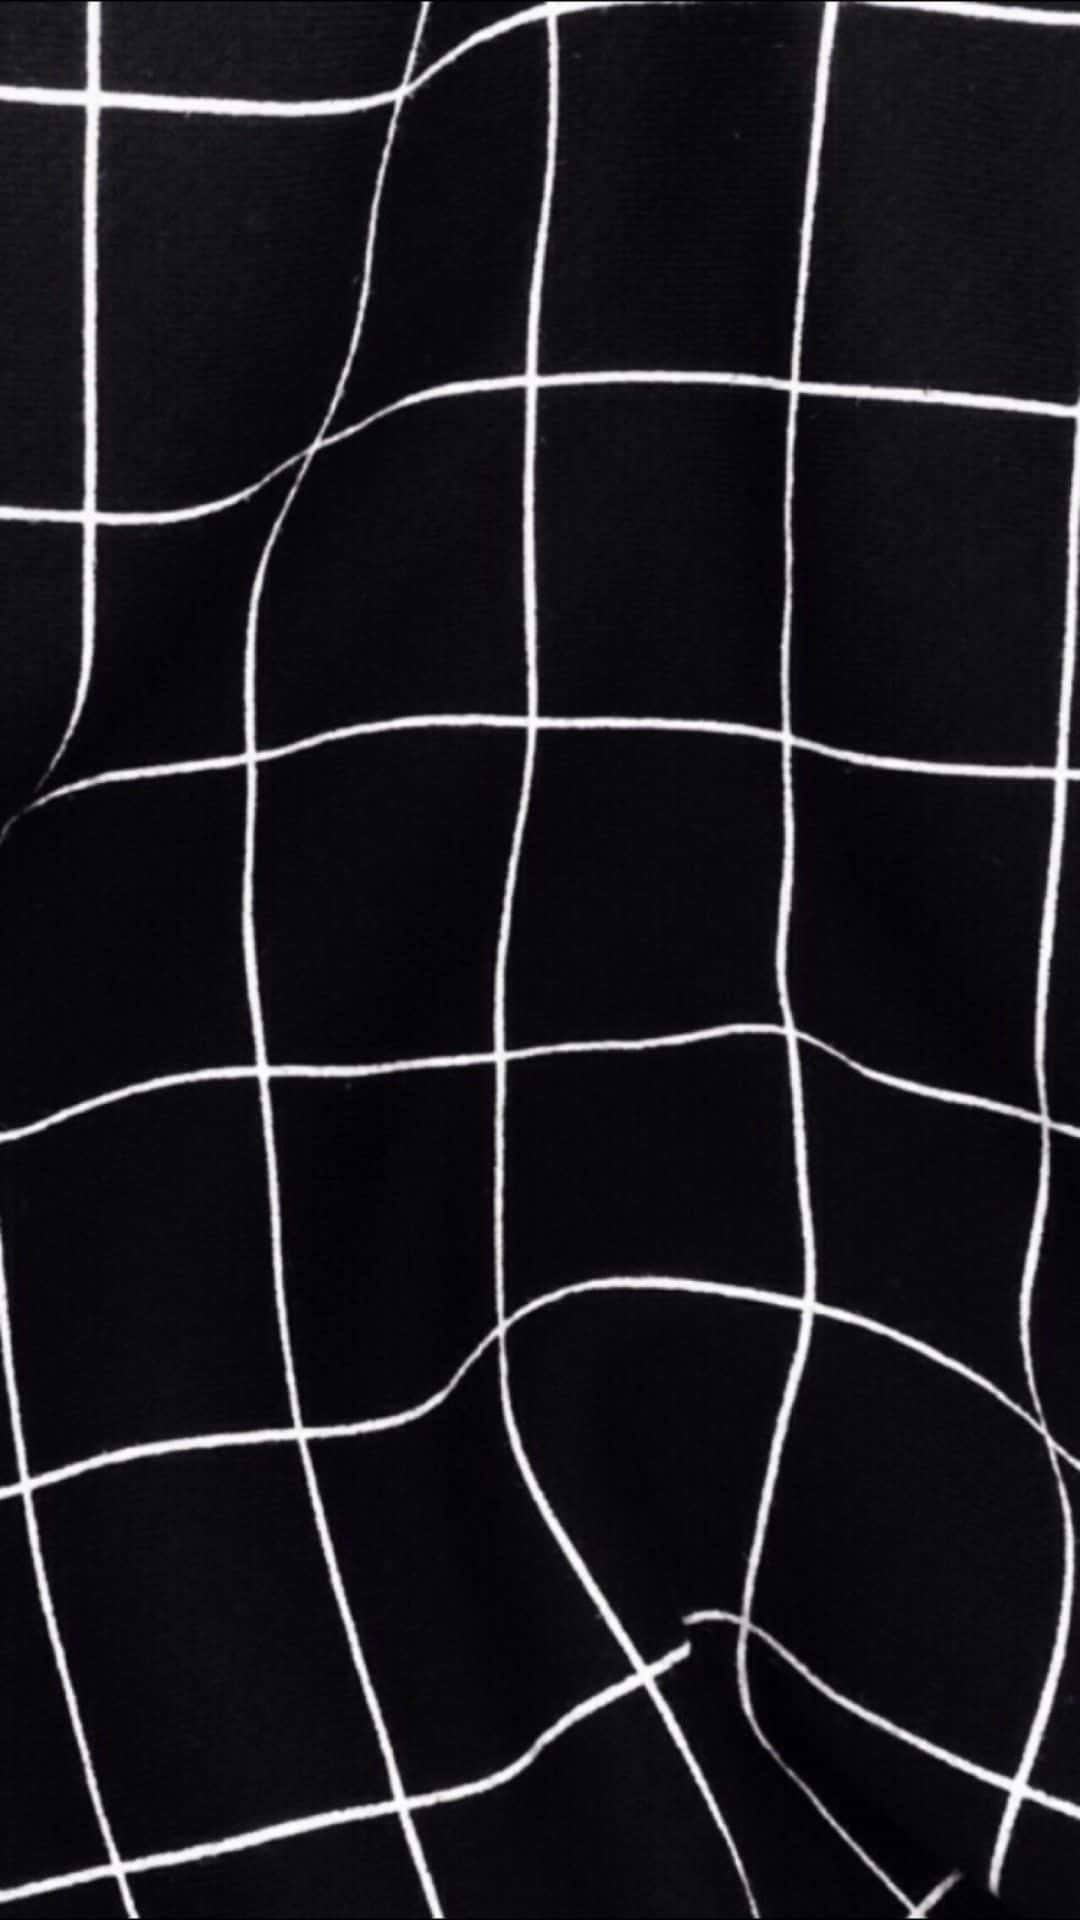 Get creative and stylish with a Grid Aesthetic Iphone Wallpaper